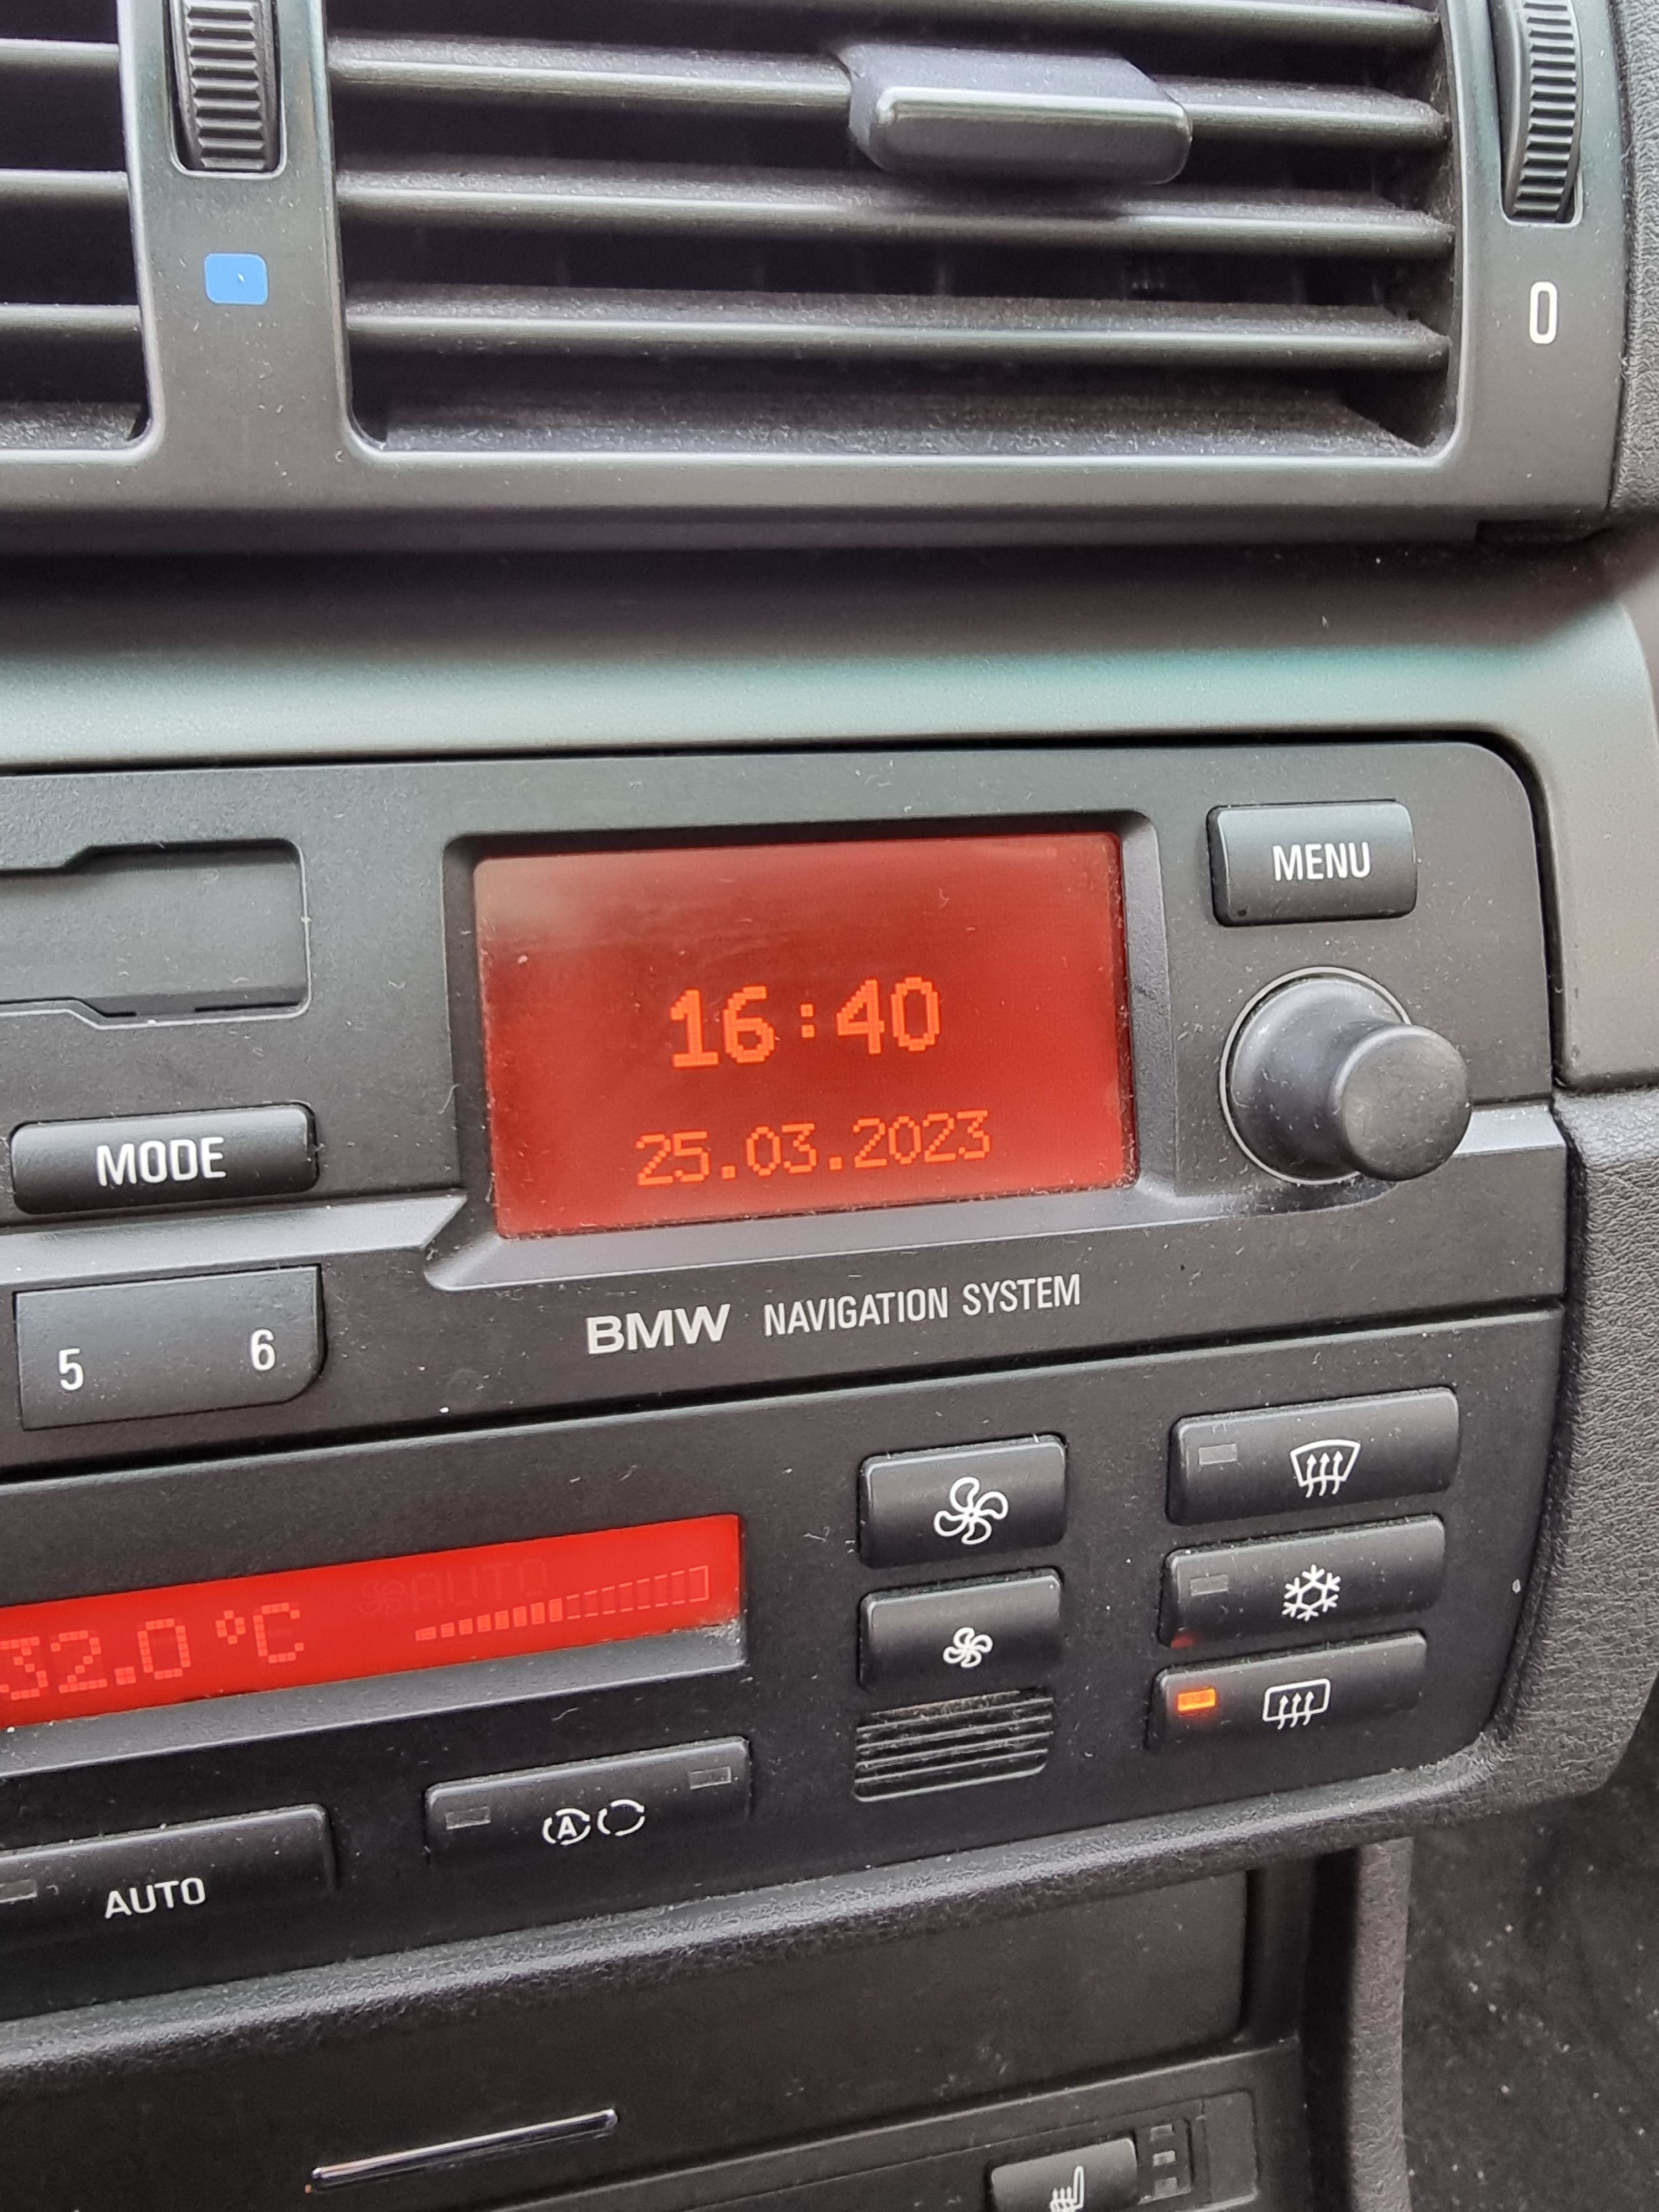 Car dashboard showing BMW Navigation System with time and date displayed